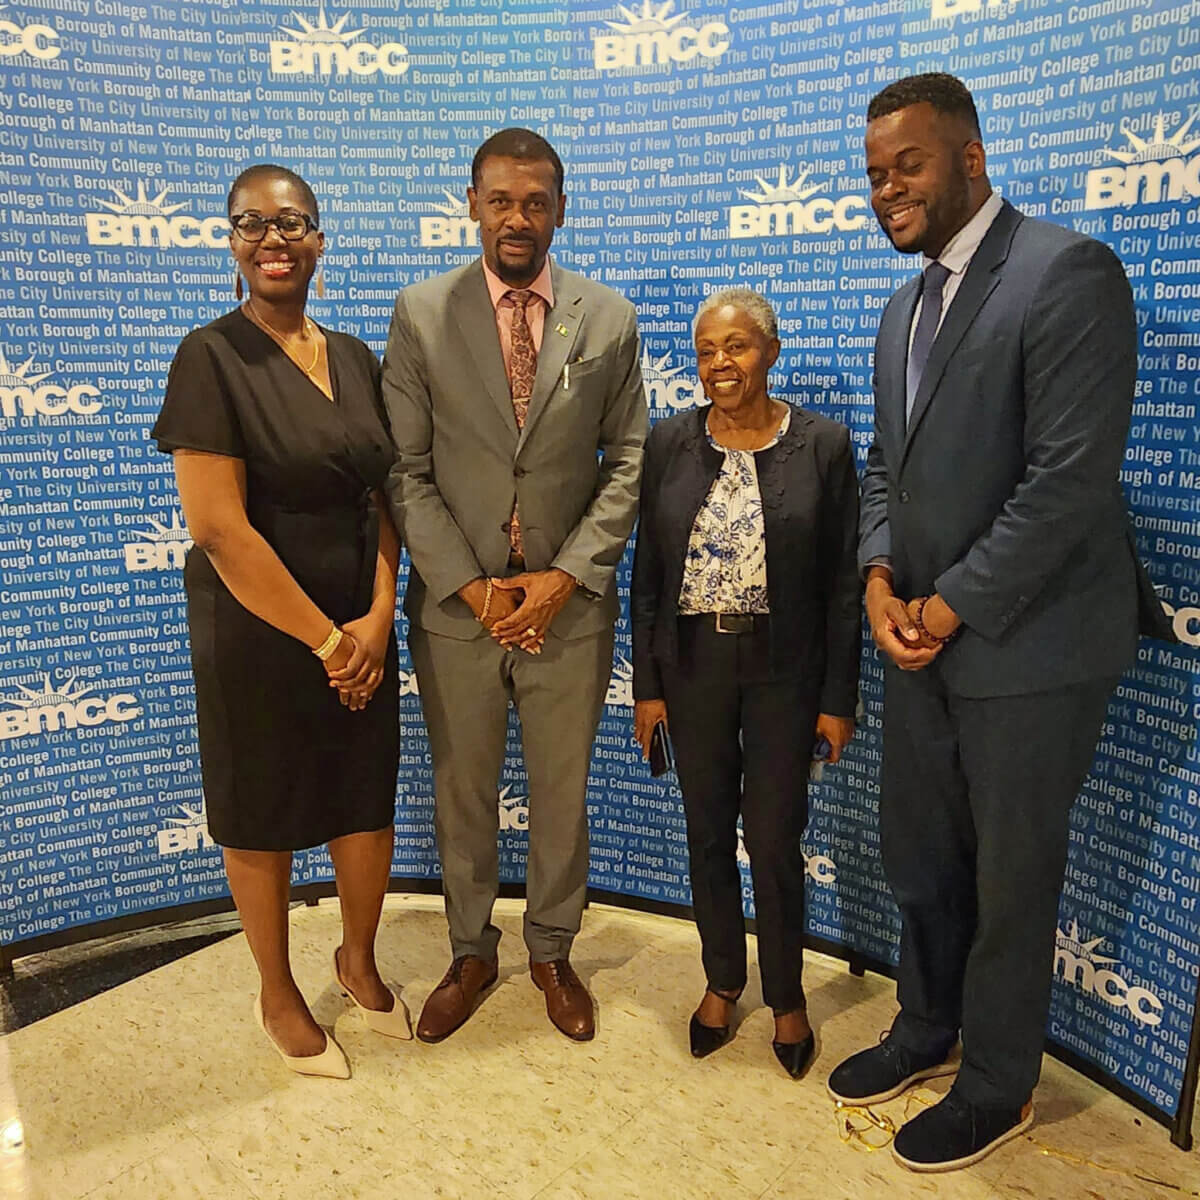 From left: Carlene Hunte-Nelson - BMCC President Student Government Association, CG Rondy “Luta” McIntosh, Dr. Marva Craig - BMCC VP Student Affairs and Jeremiah Hyacinth- CG St. Lucia.